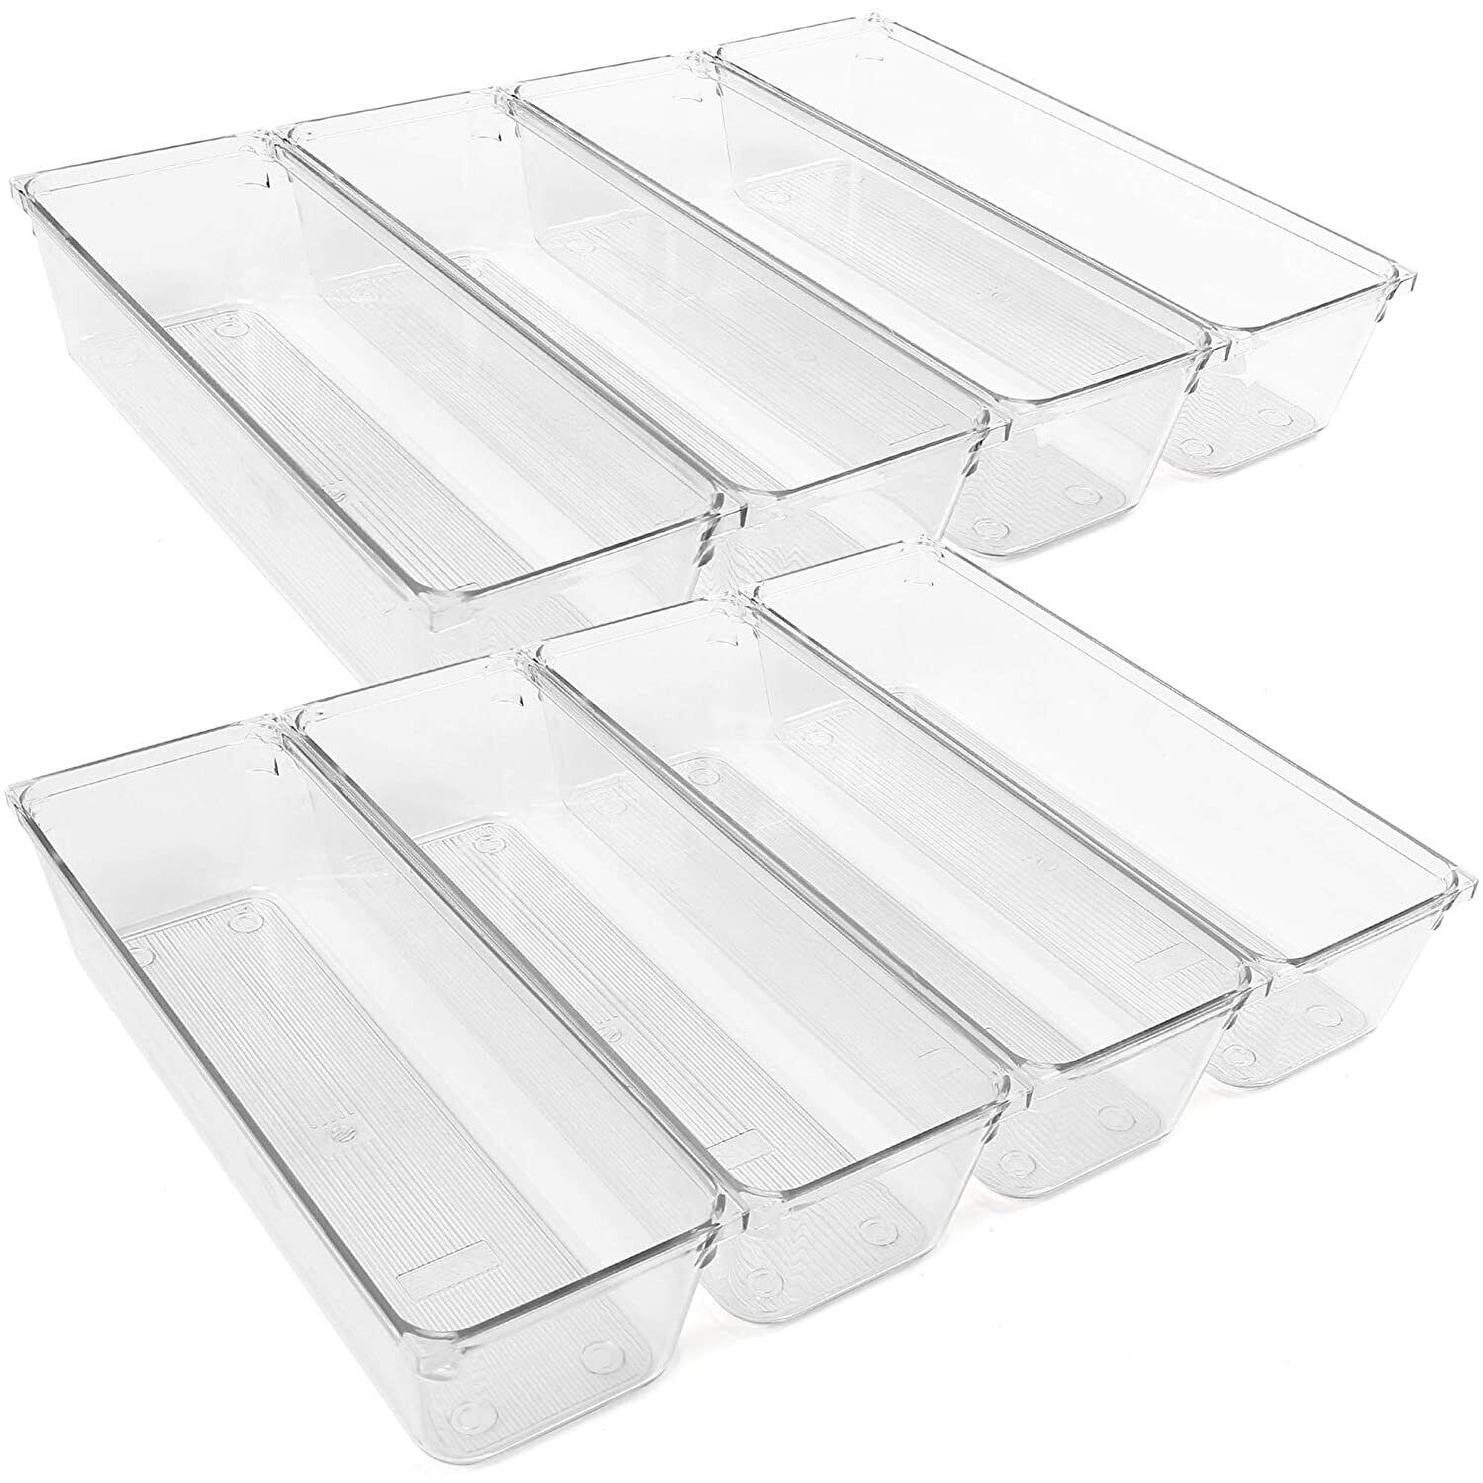 8Pcs Clear Plastic Drawer Organizers - On Sale - Bed Bath & Beyond